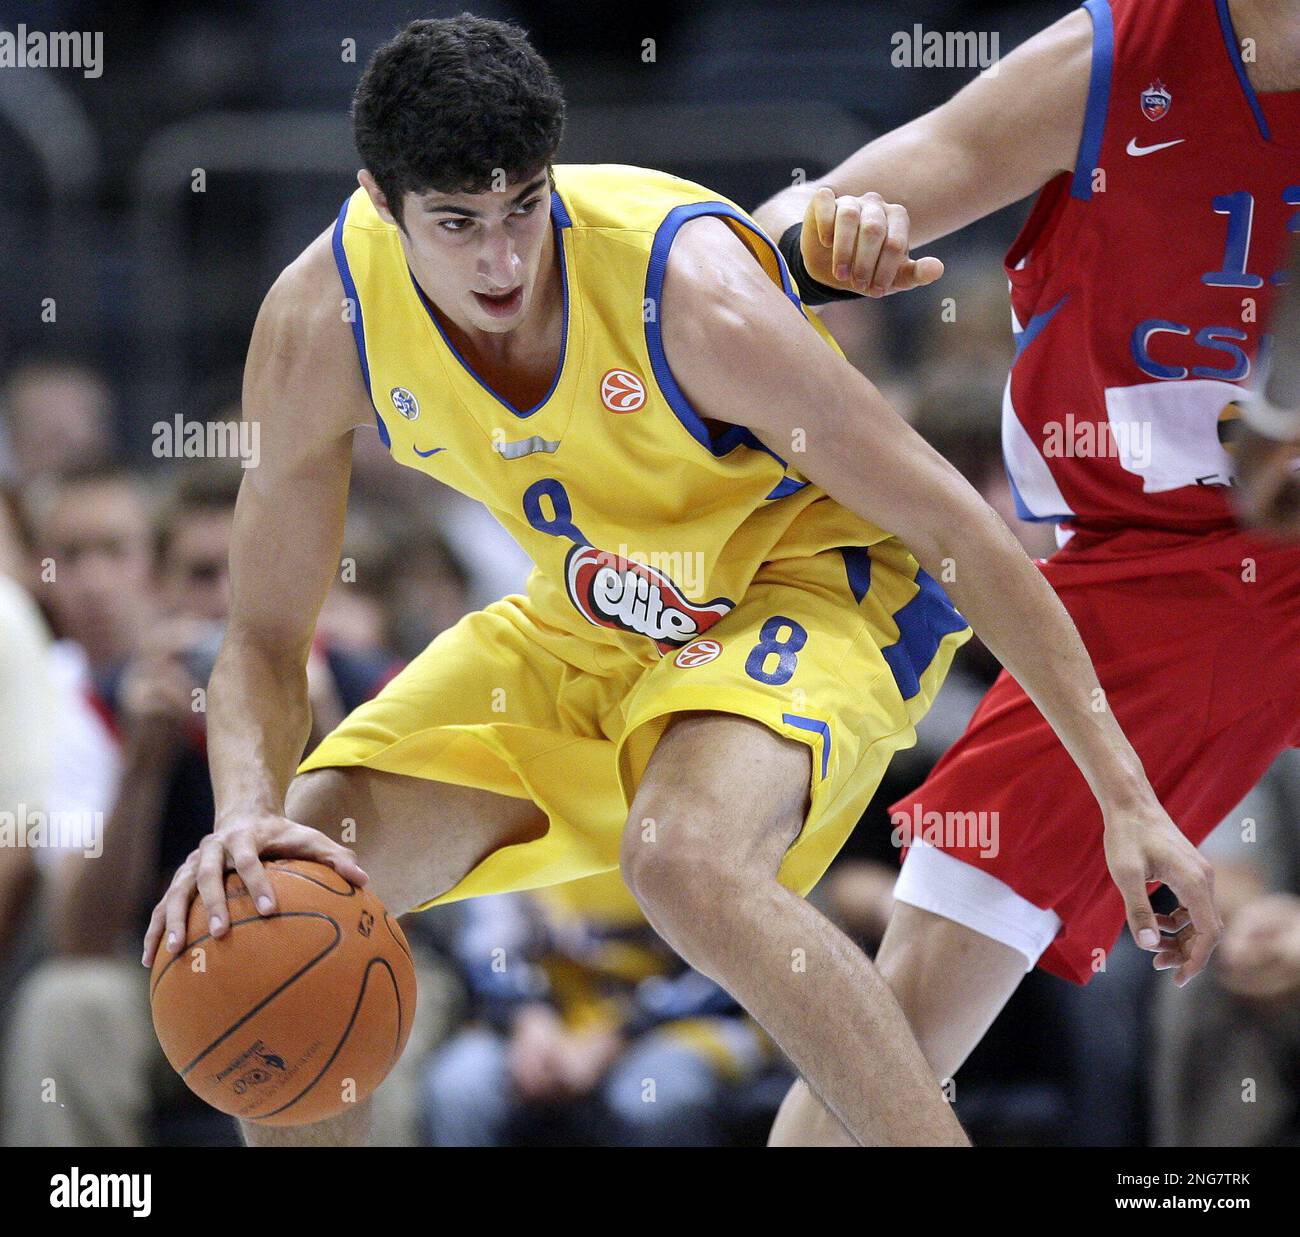 Maccabis Lioir Elyahu plays the ball during a NBA Live Tour friendly basketball match between CSKA Moscow and Maccabi Elite Tel Aviv at the Koeln Arena in Cologne, Germany, Tuesday, Oct